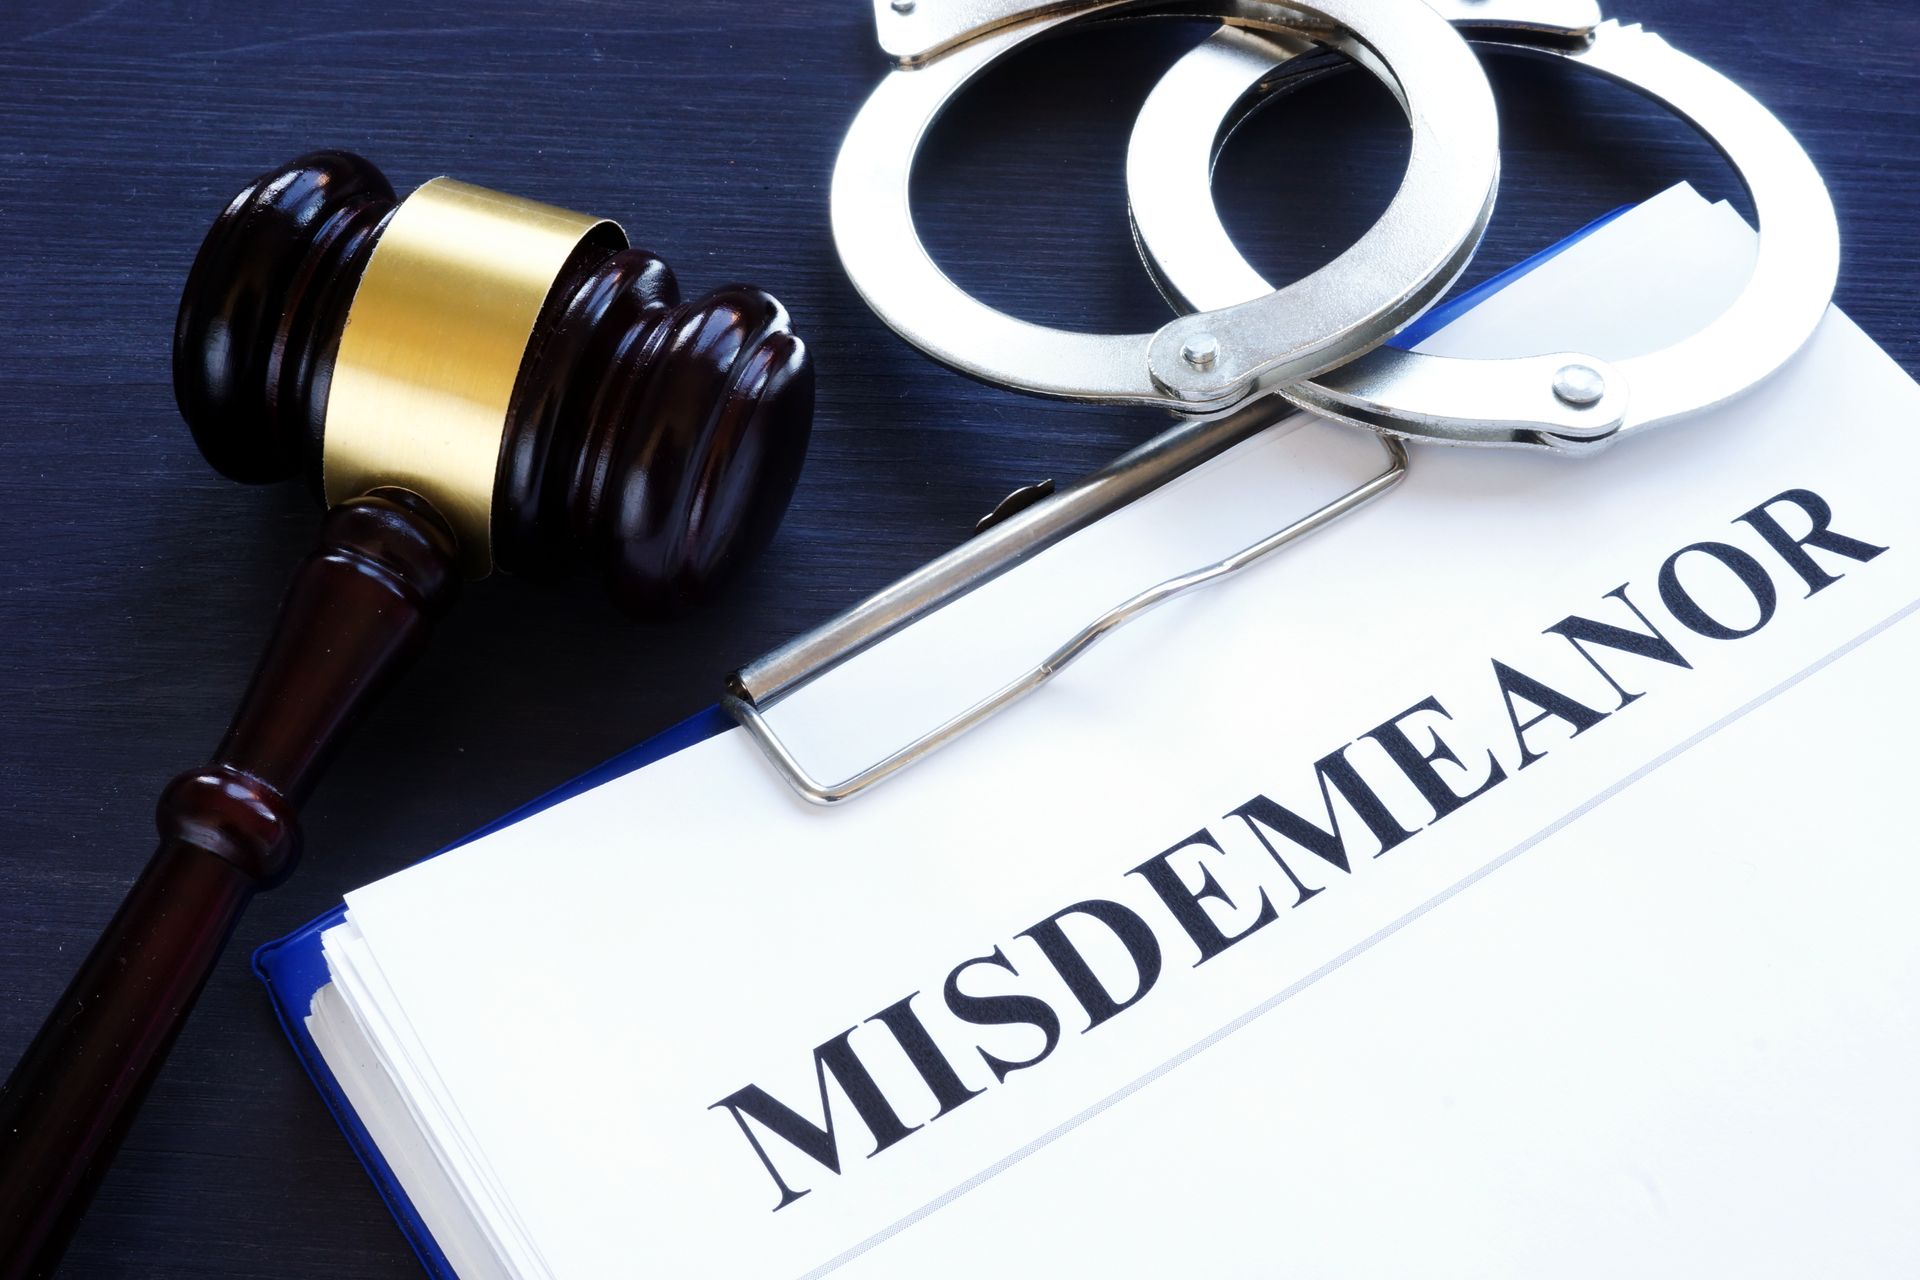 misdemeanor crimes on a paper